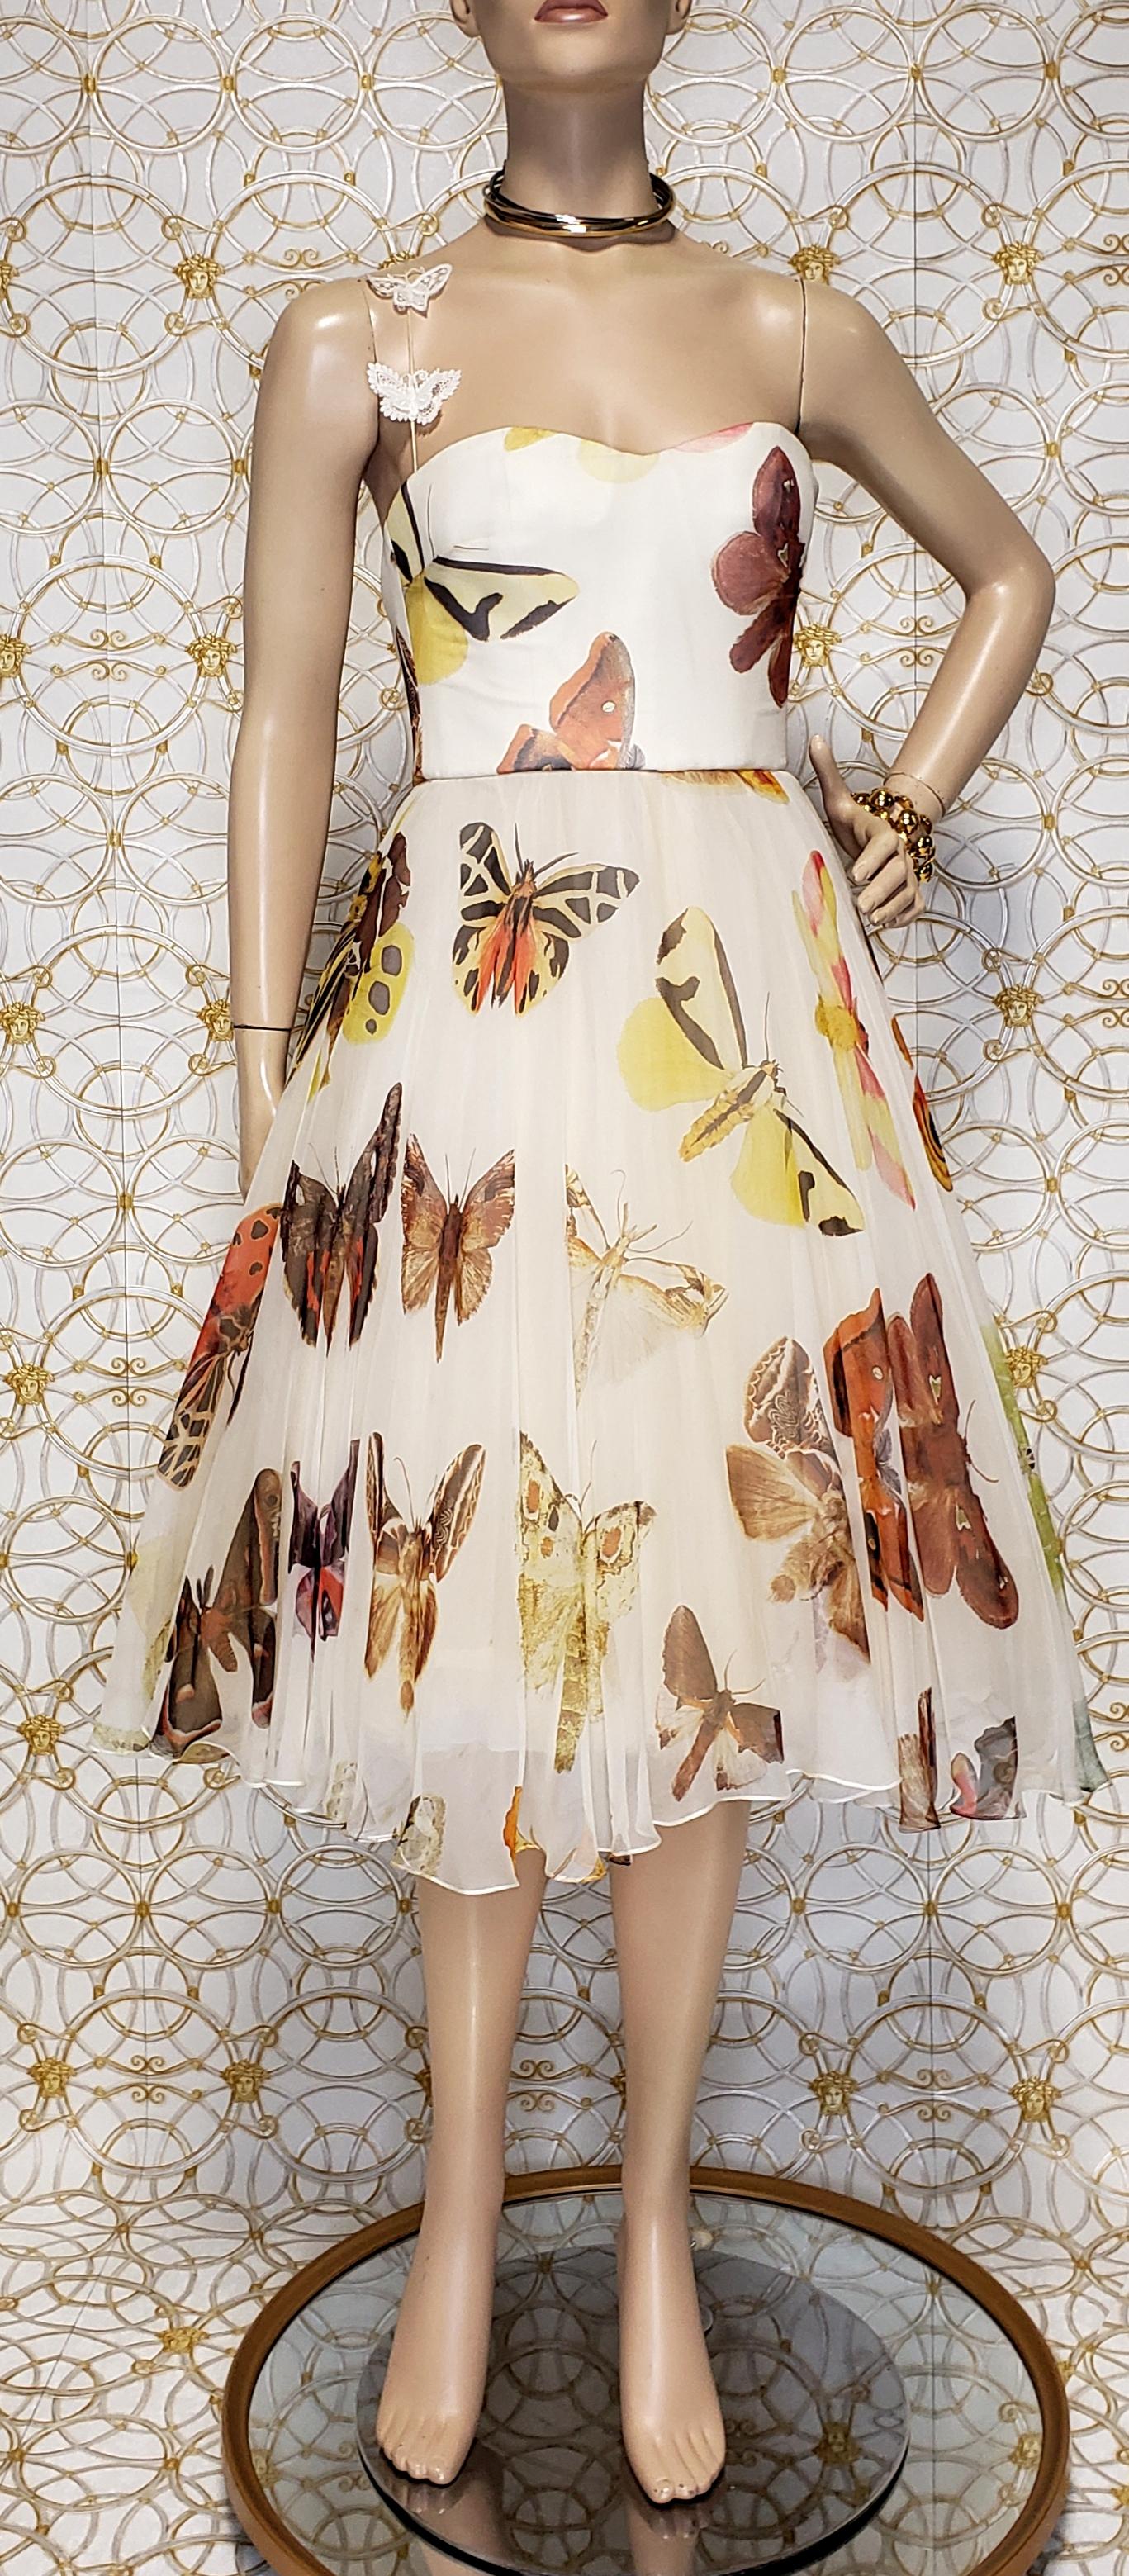 2005 Vintage Iconic Alexander McQueen butterfly print dress 5